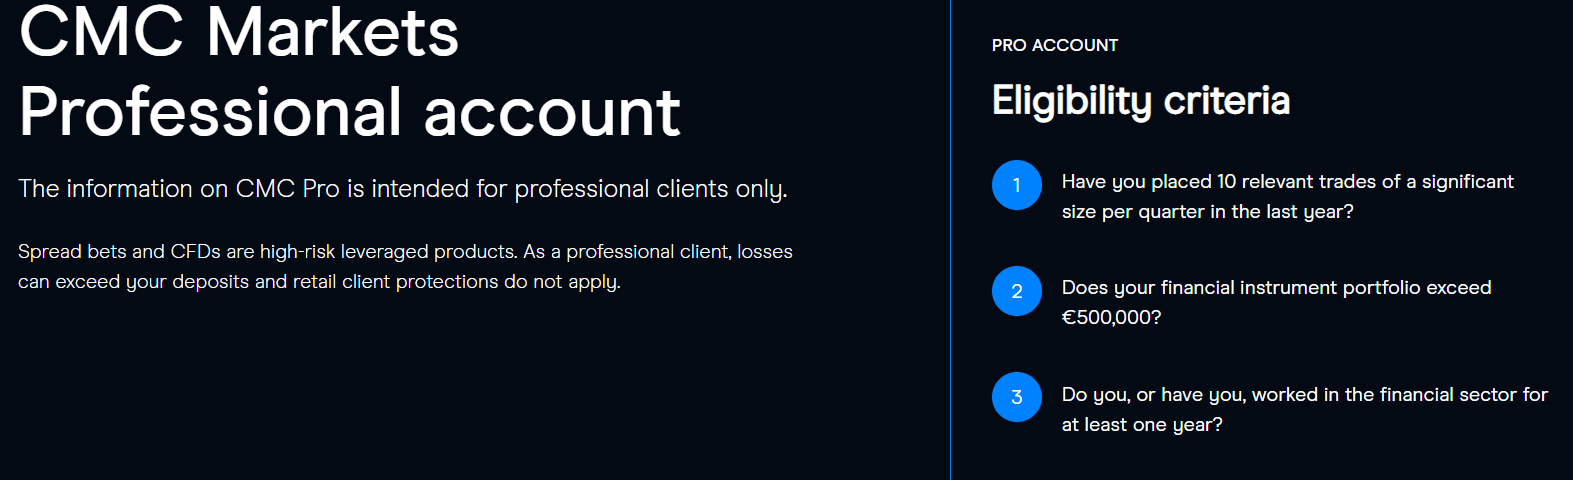 Professional Client Requirements